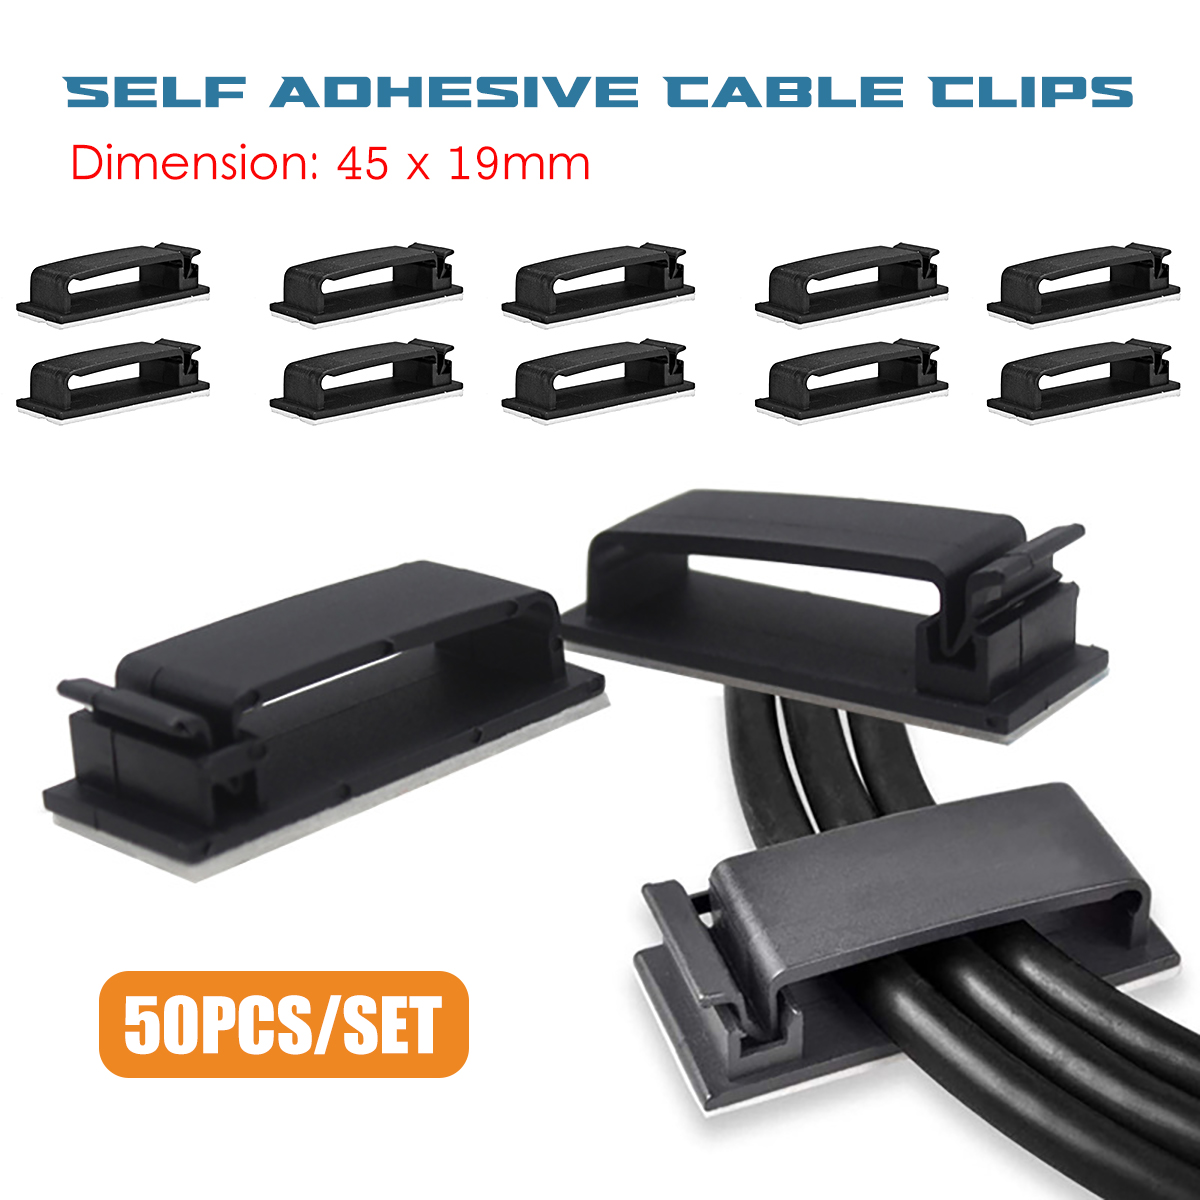 Find 50Pcs Cable Clips Self Adhesive Cord Management Wire Holder Organizer Clamp for Computer for Sale on Gipsybee.com with cryptocurrencies